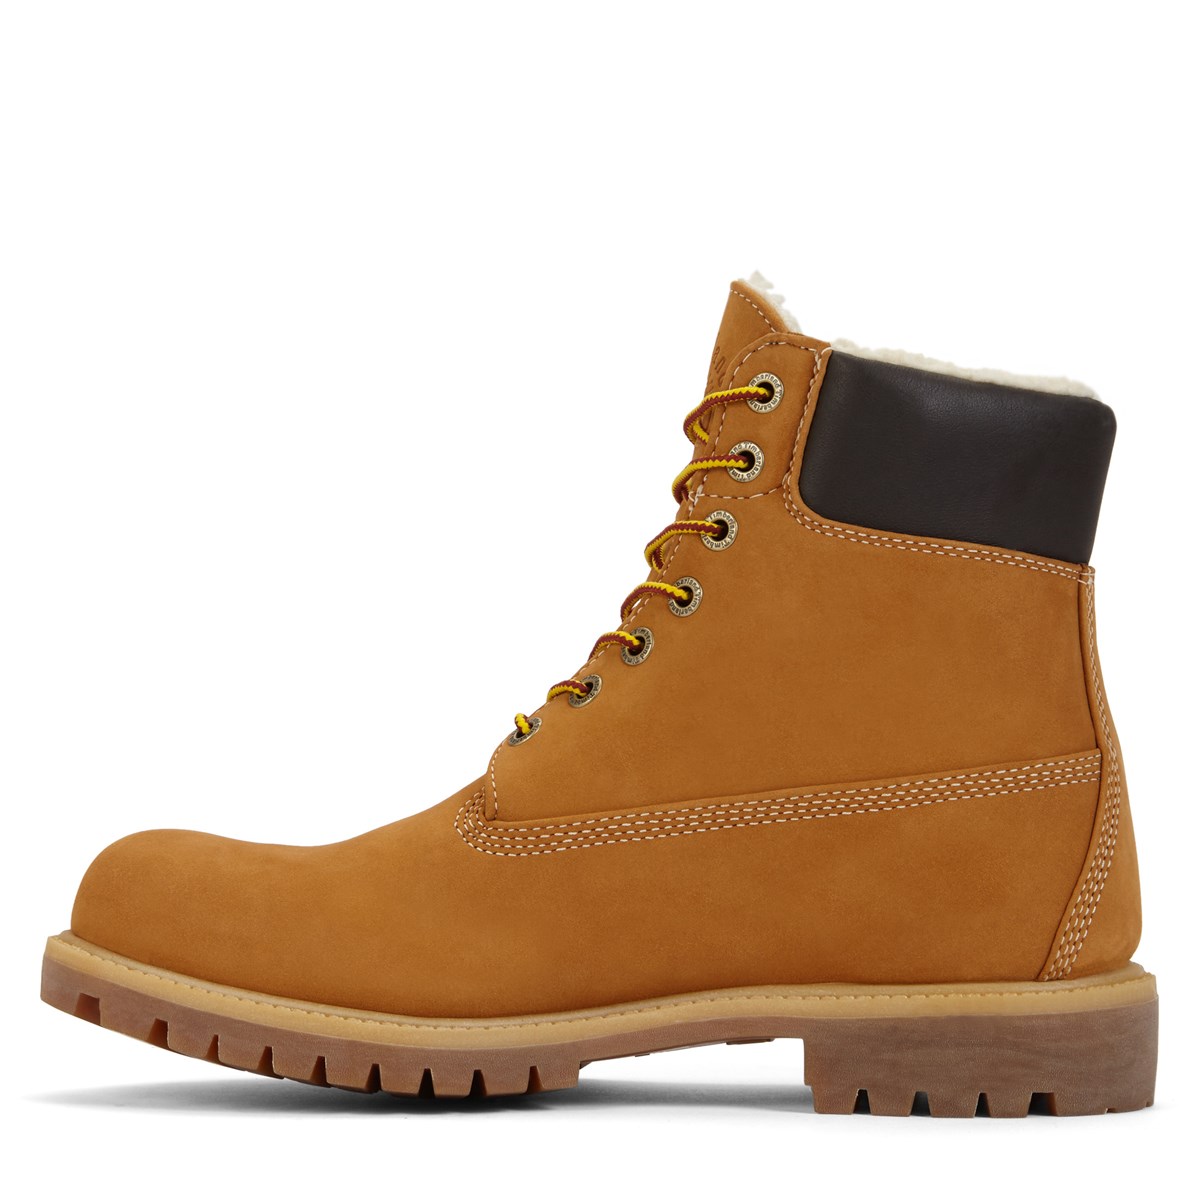 Heritage 6 Warm Lined Boots in Wheat 